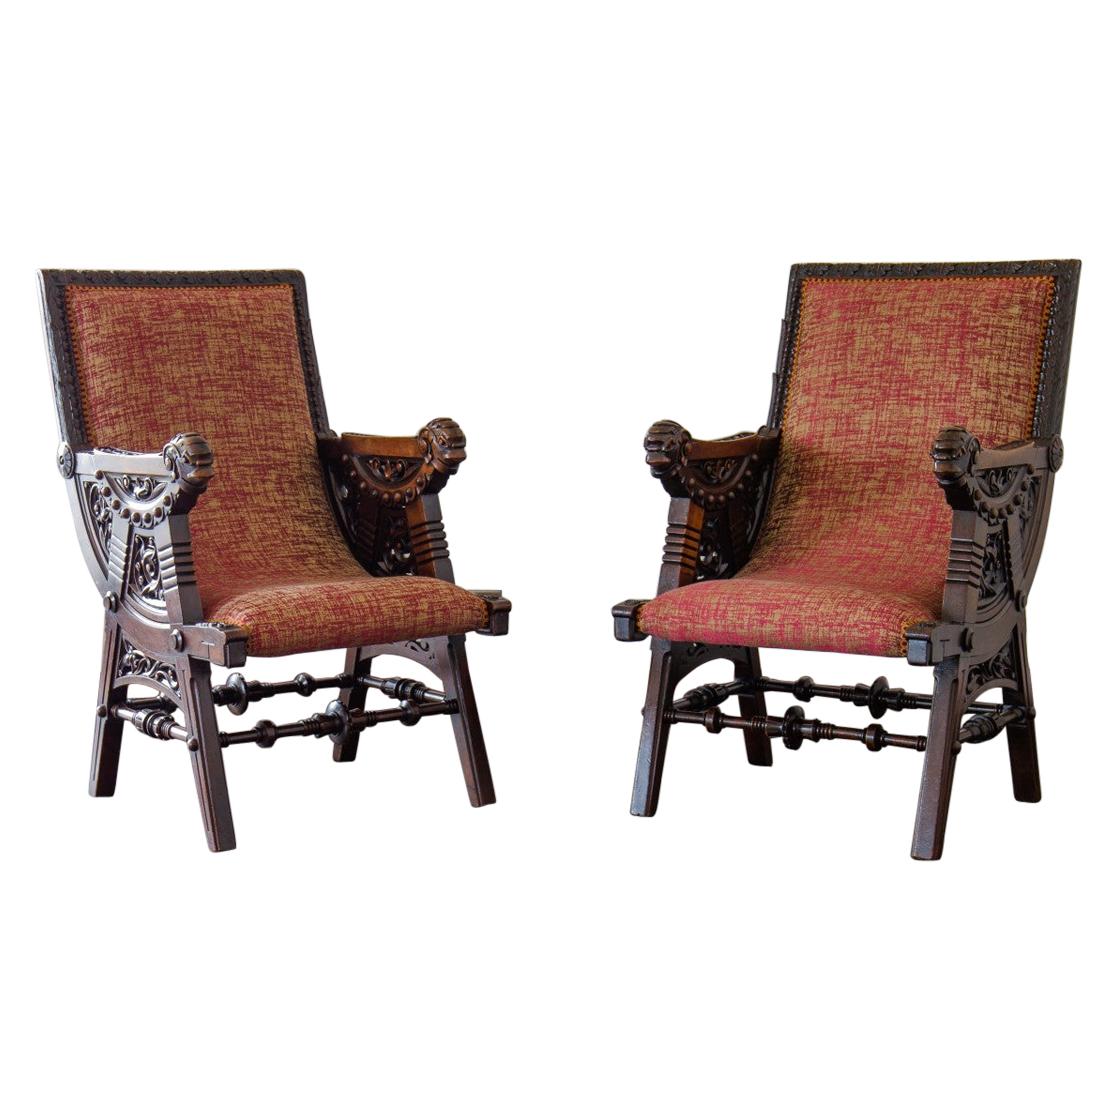 Pair of Late 19th Century French Carved Walnut Armchairs